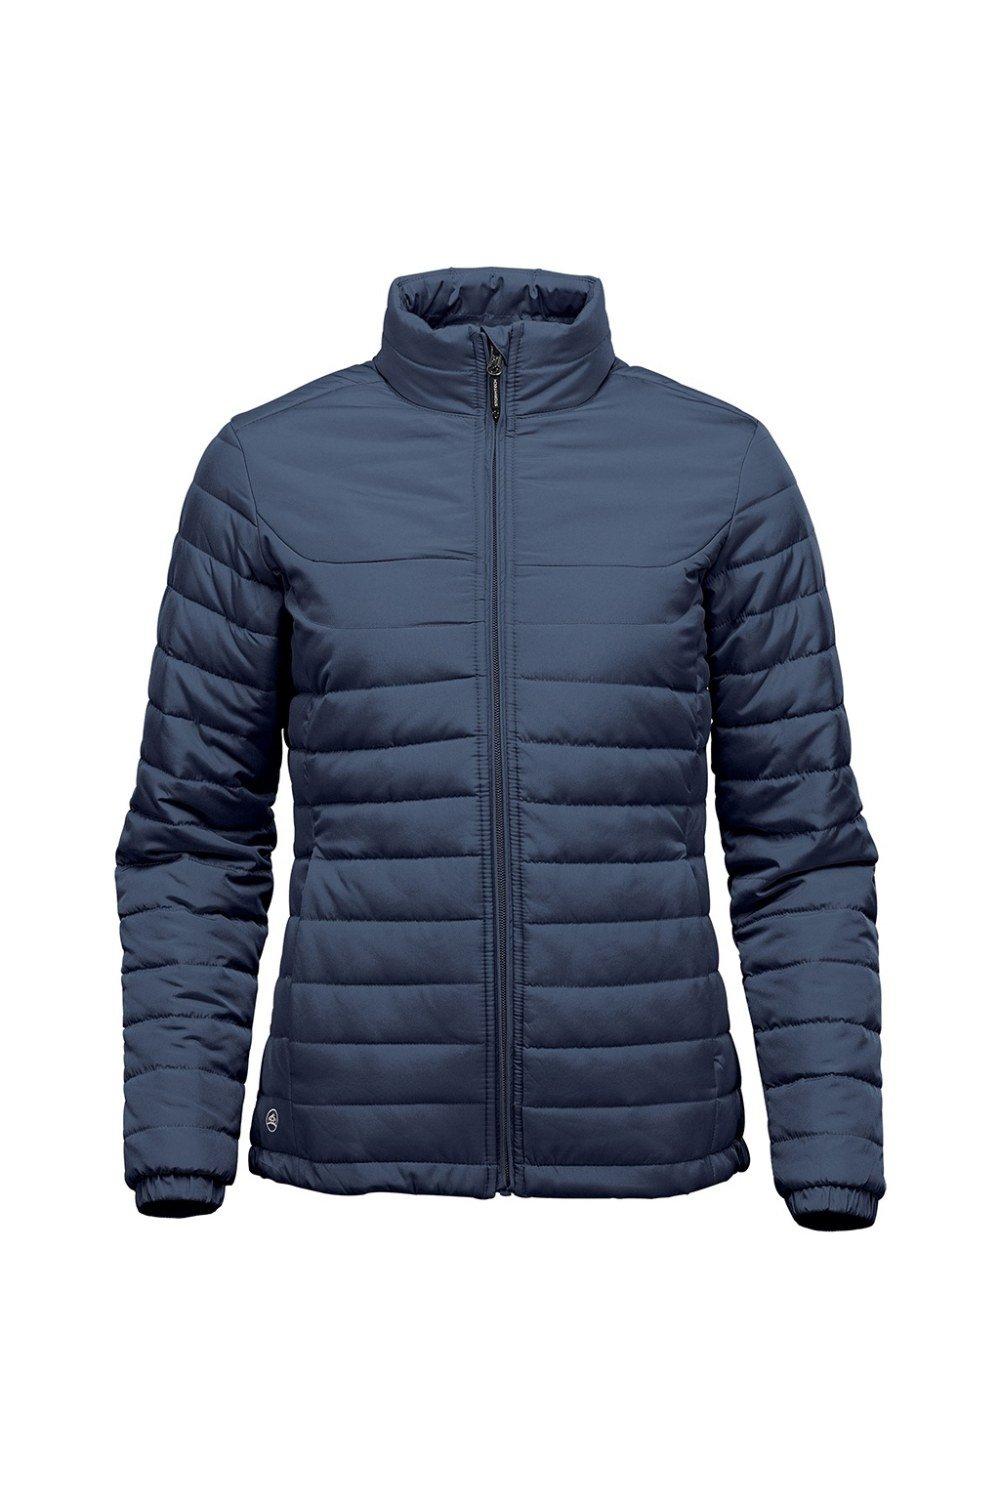 Stormtech Women's Nautilus Quilted Padded Jacket|Size: M|navy